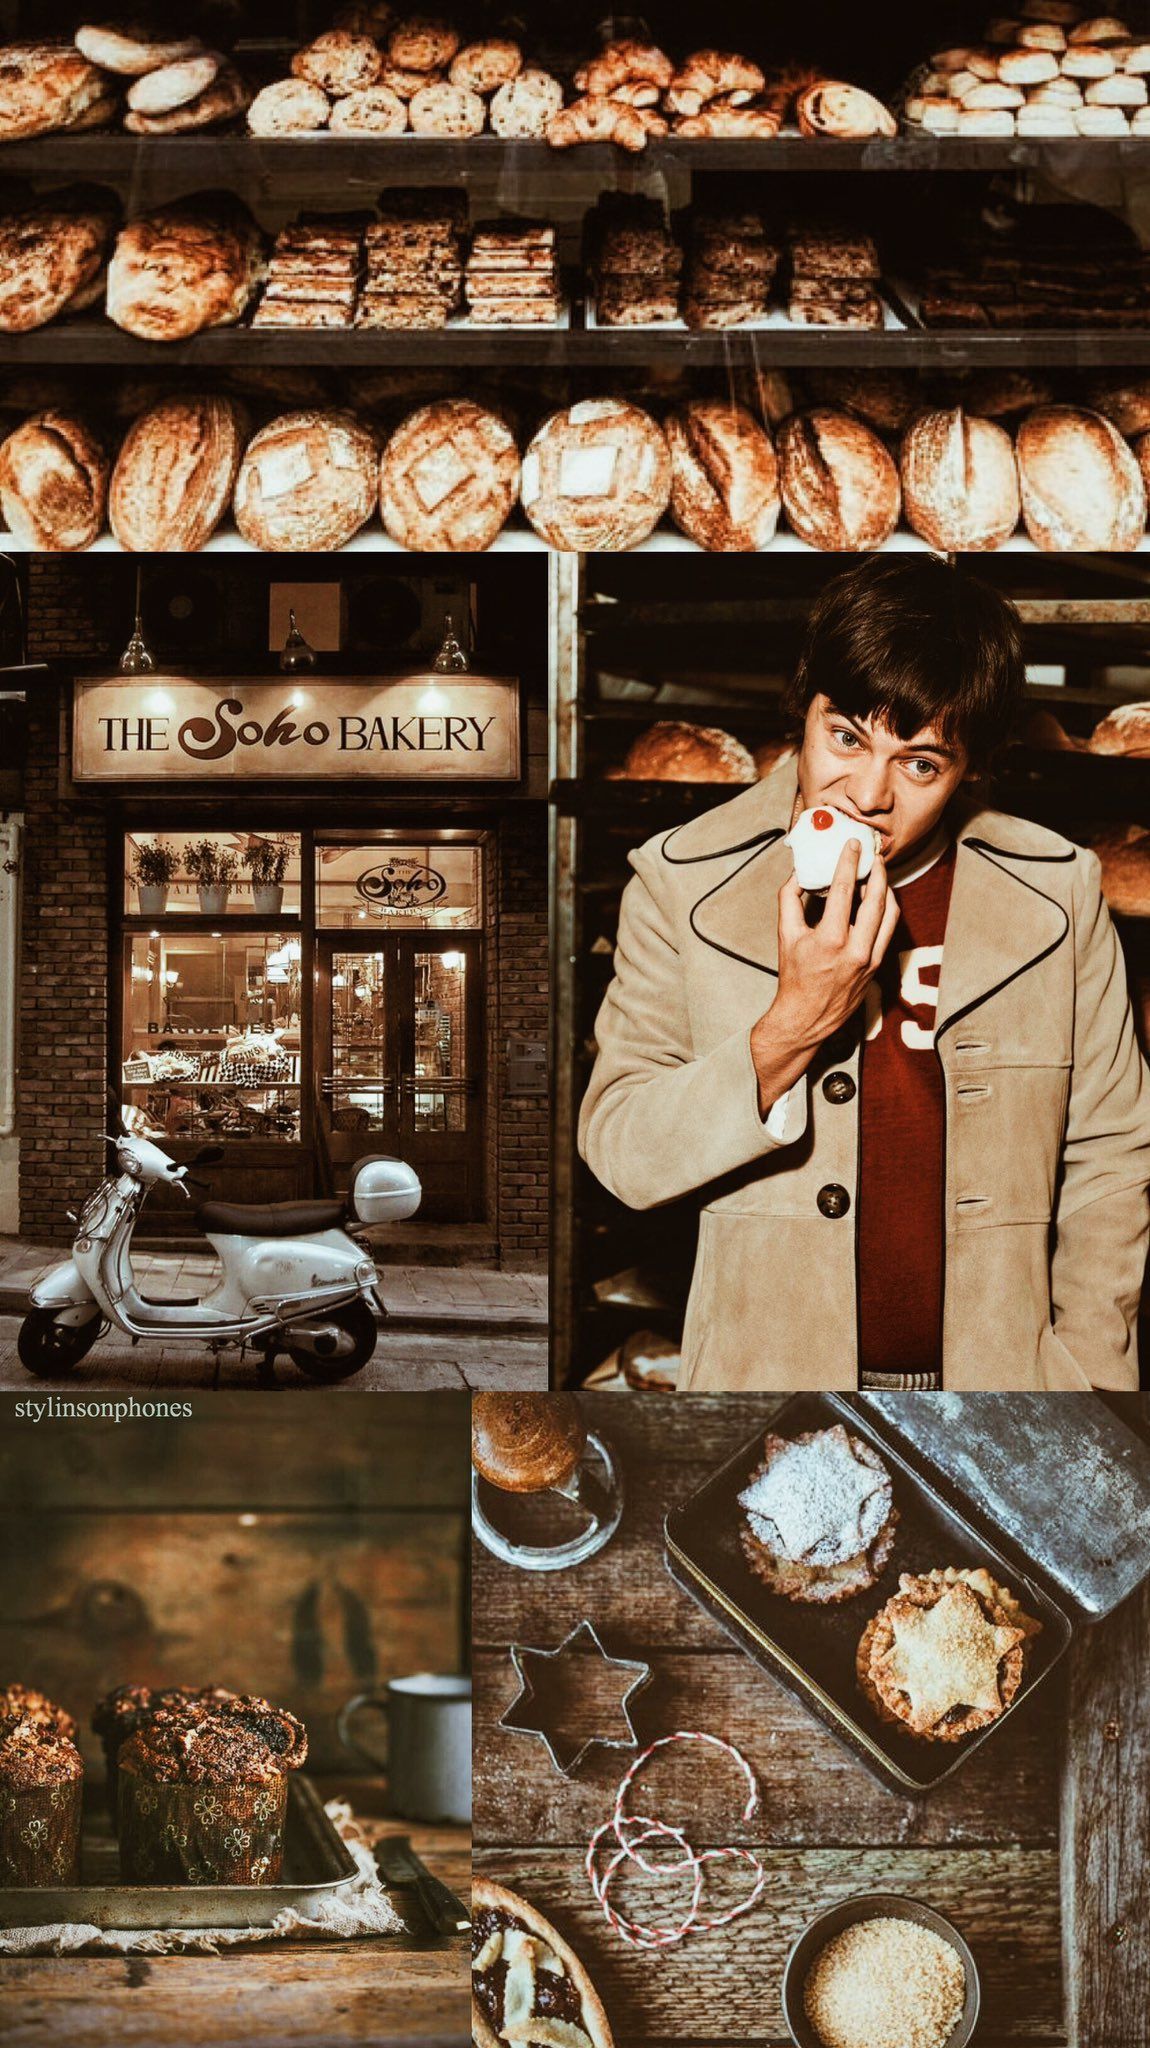 Collage of pictures from the movie Roman Holiday, including a bakery, a scooter, and a woman eating a muffin - Bakery